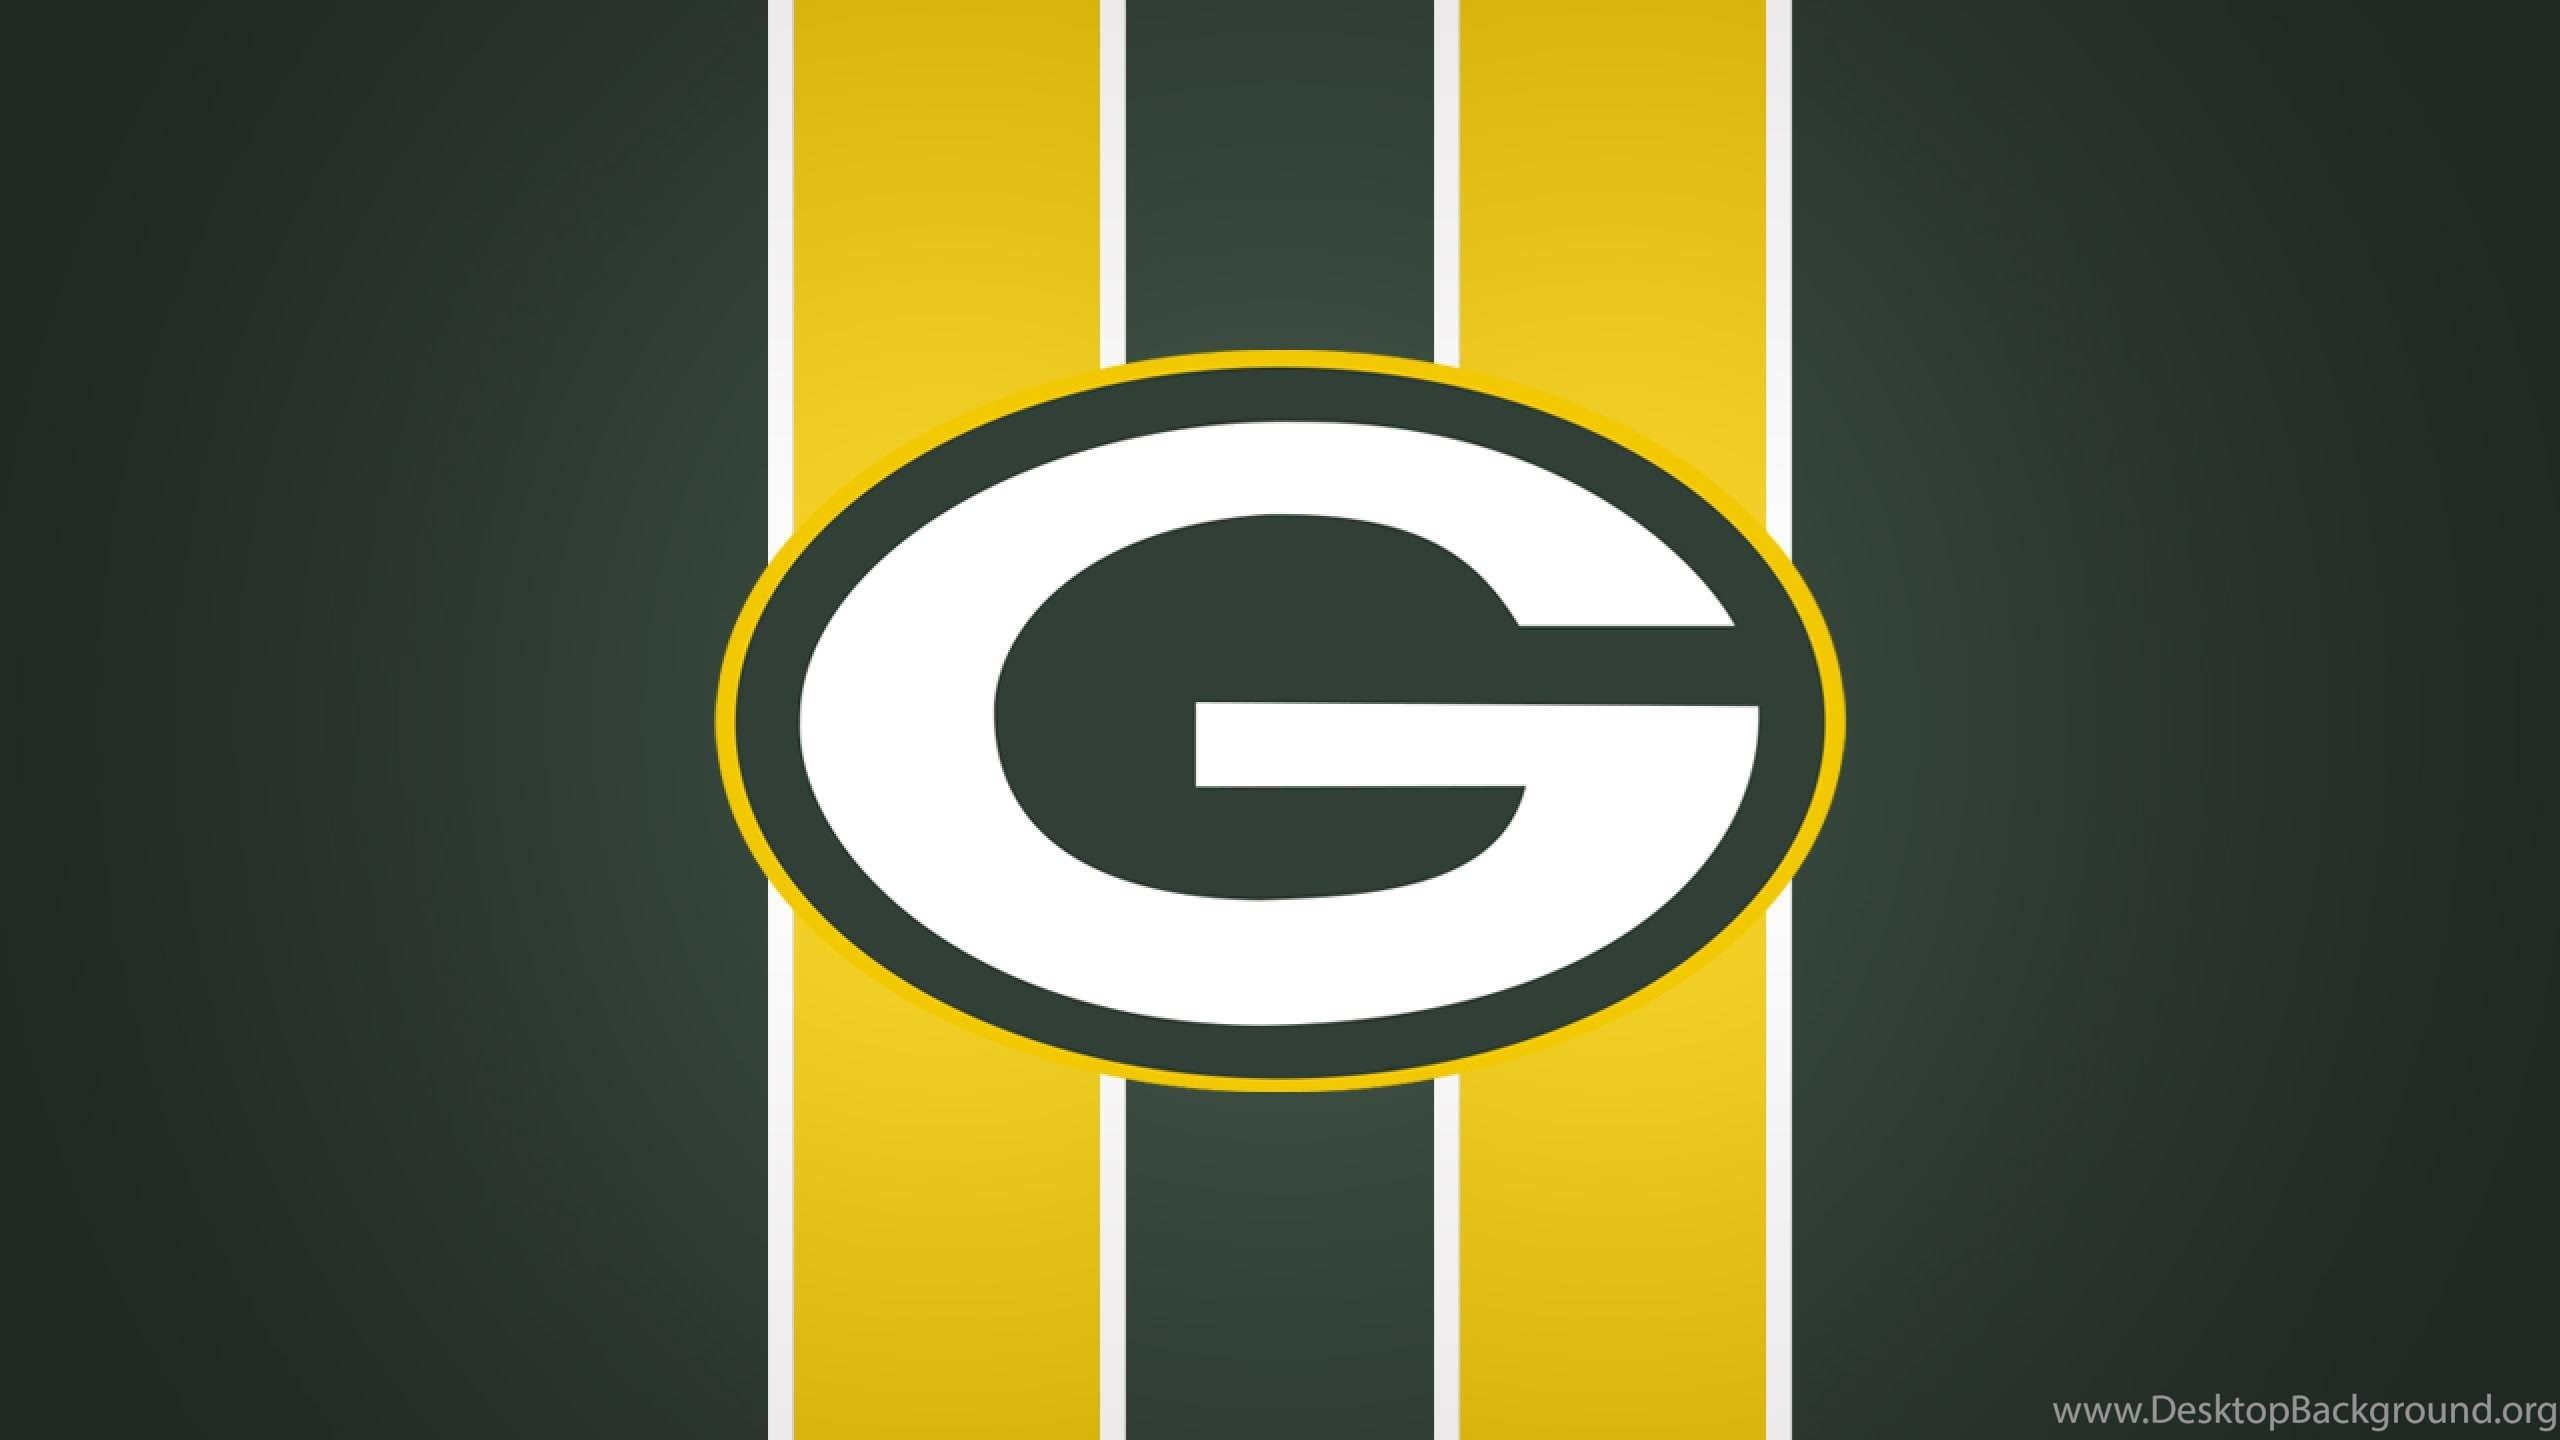 Green Bay Packers, Logo, 2560x1440 HD Wallpaper And FREE Desktop Background